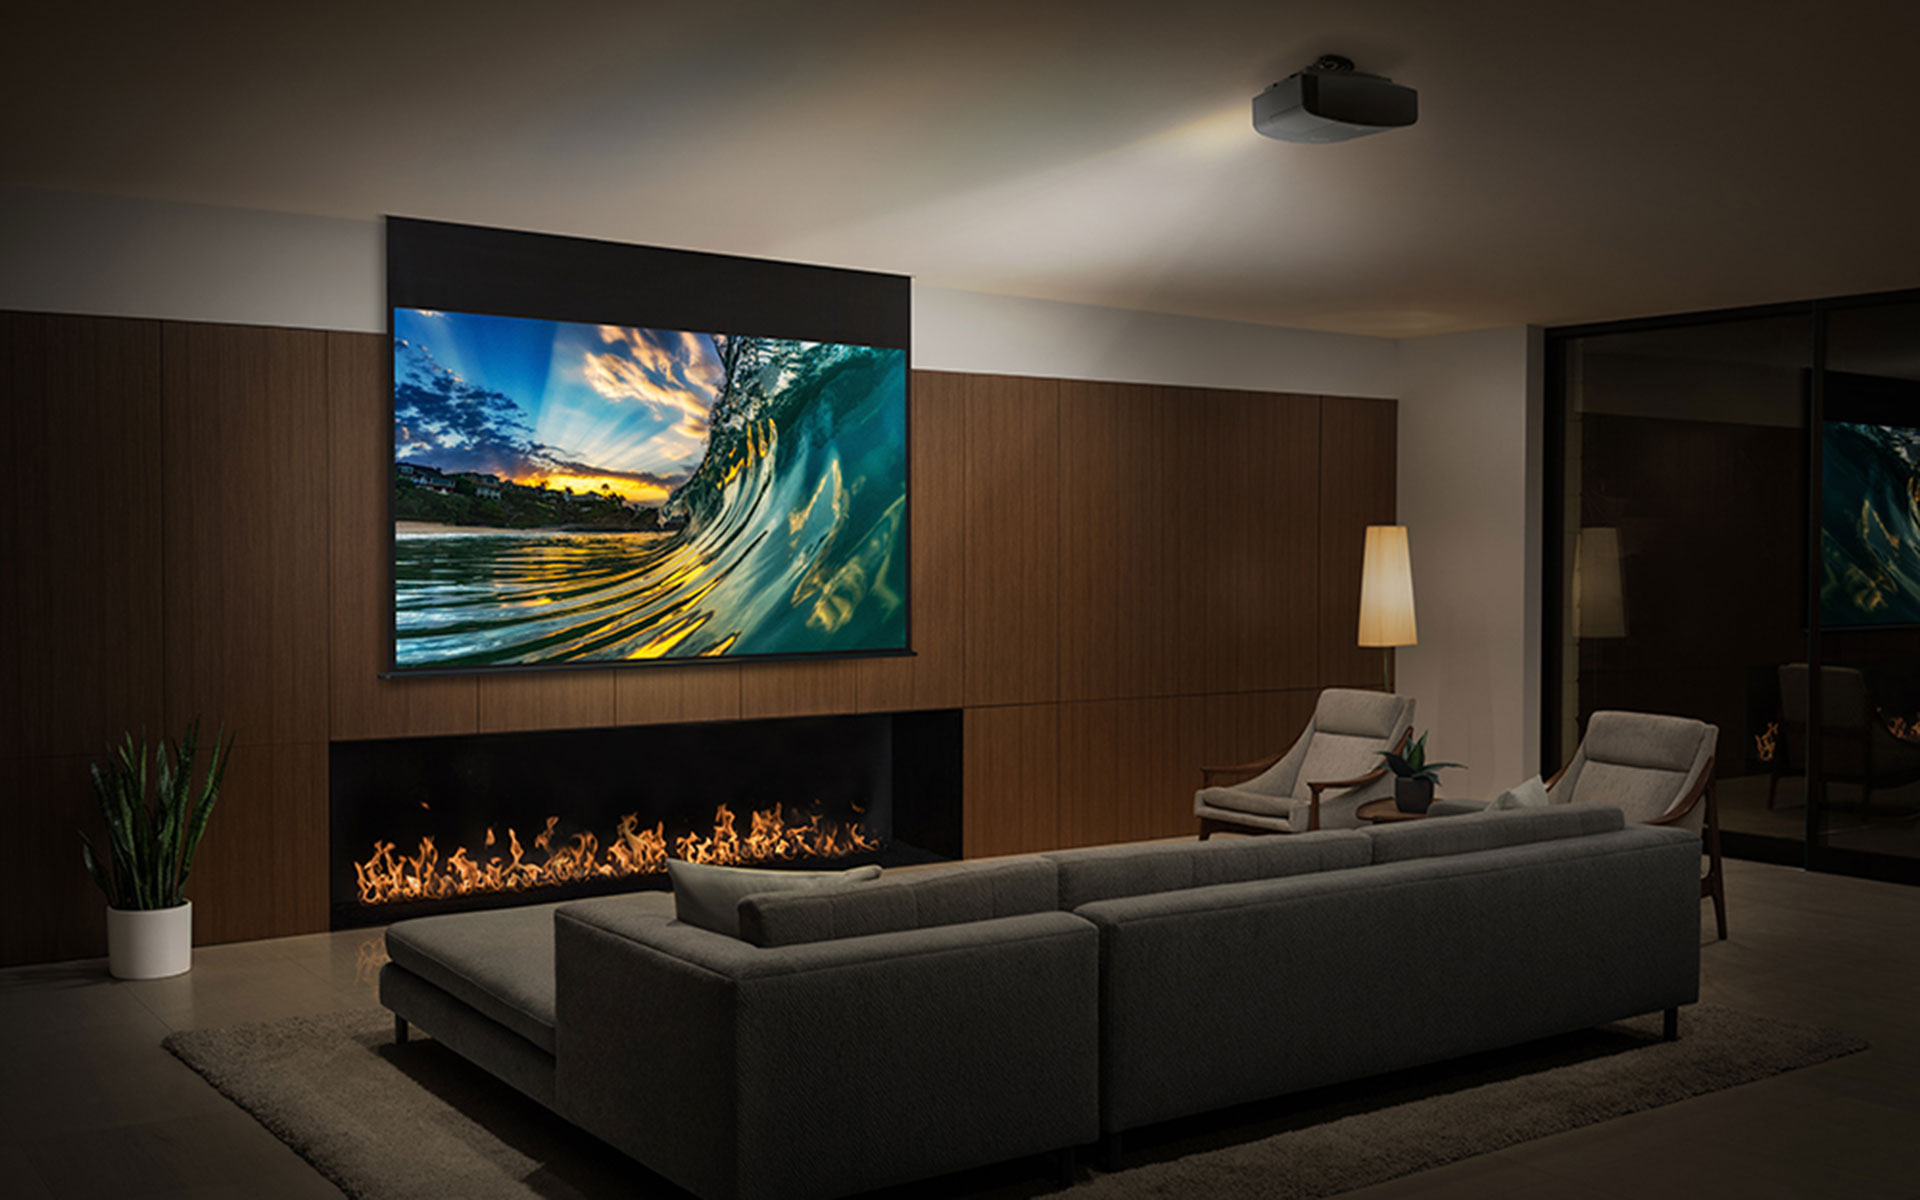 Home Theater by MIR Audio Video